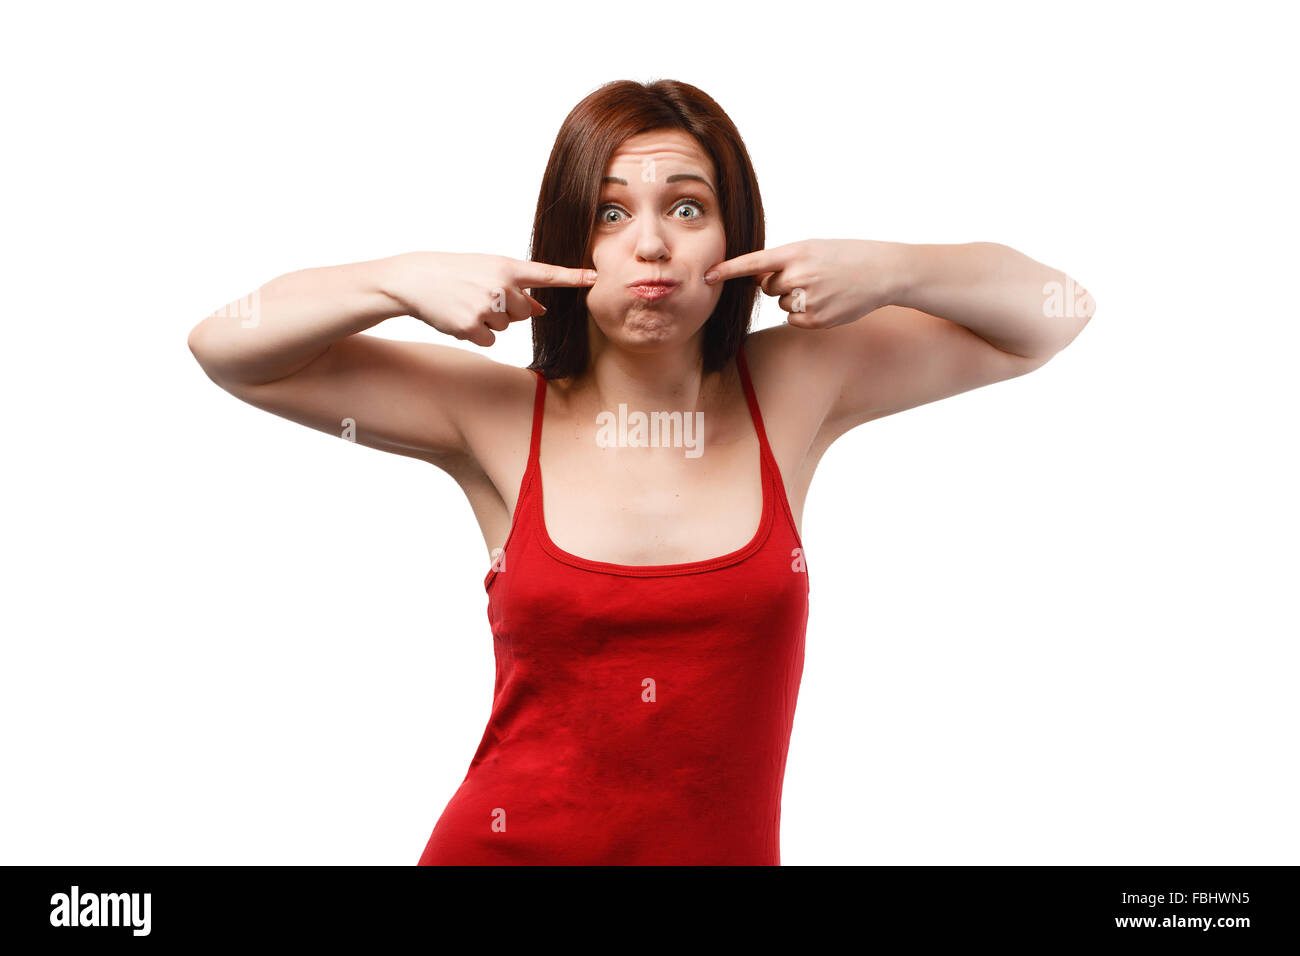 Young woman with puffed cheeks in a red shirt isolated on white background Stock Photo